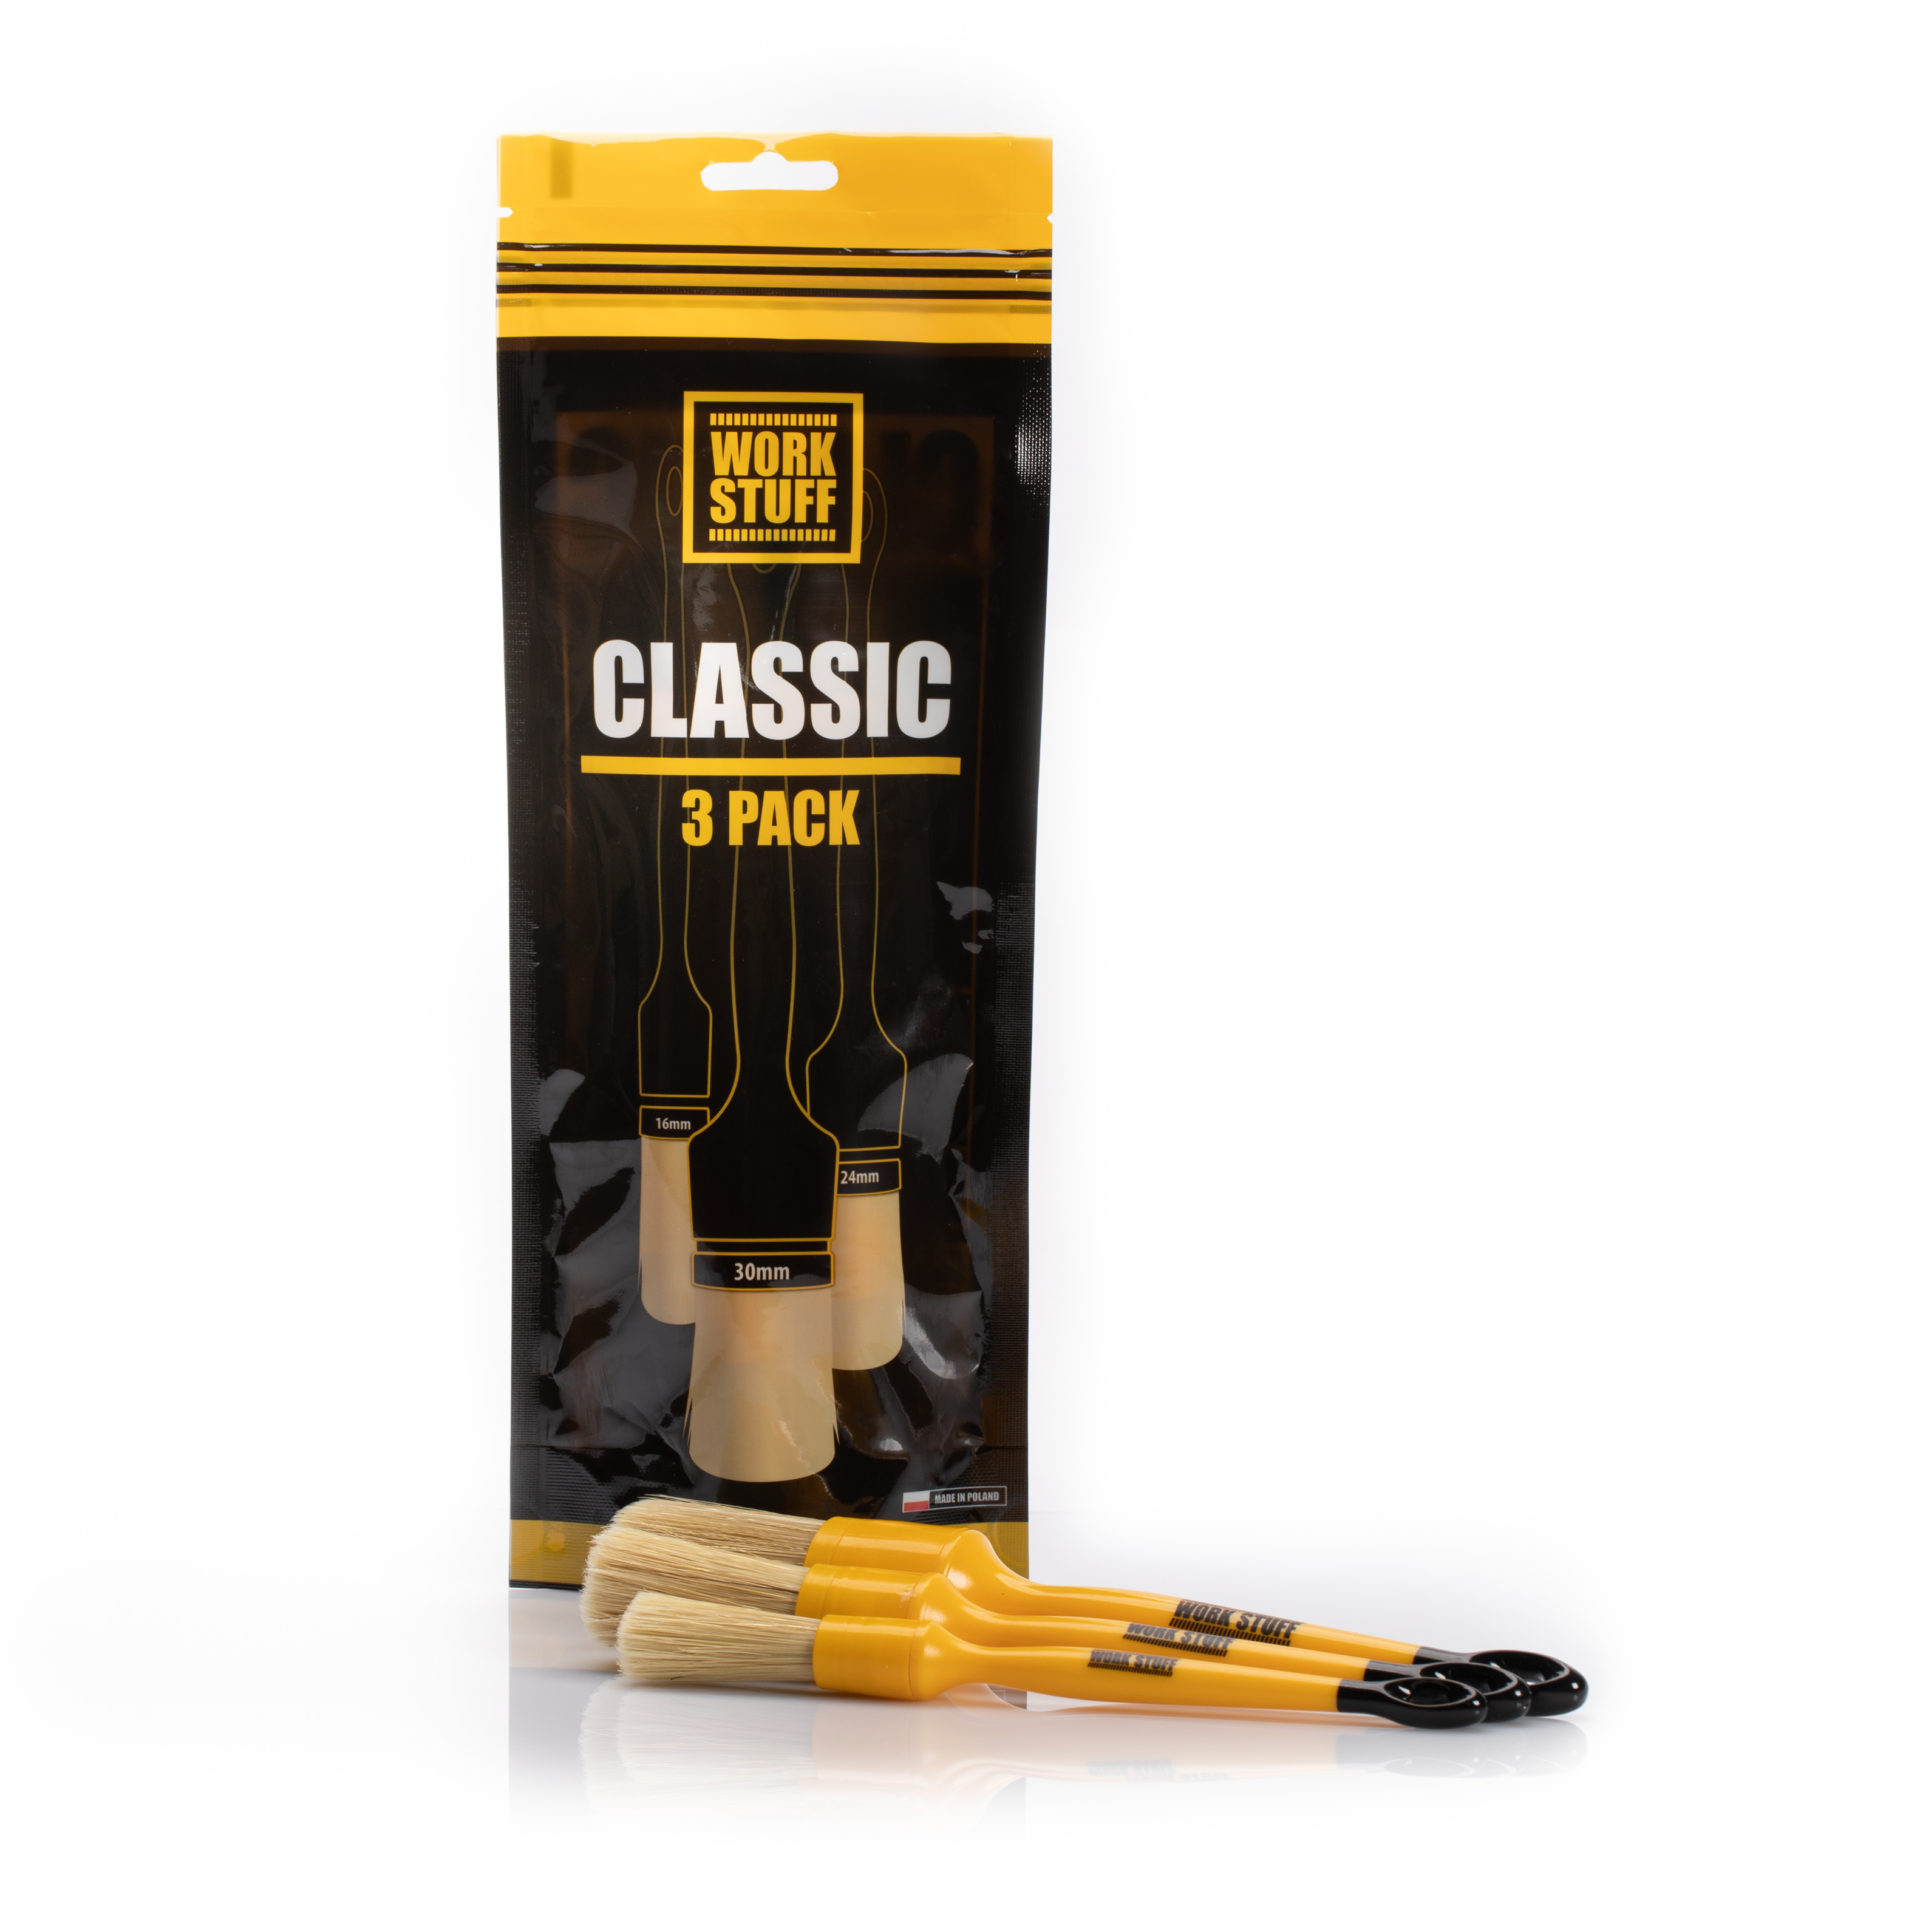 Easily clean a variety of surfaces with the Work Stuff Detailing Brush CLASSIC 3-pack set. These versatile brushes are perfect for cleaning rims and prewash, and can handle a wide range of cleaning needs.